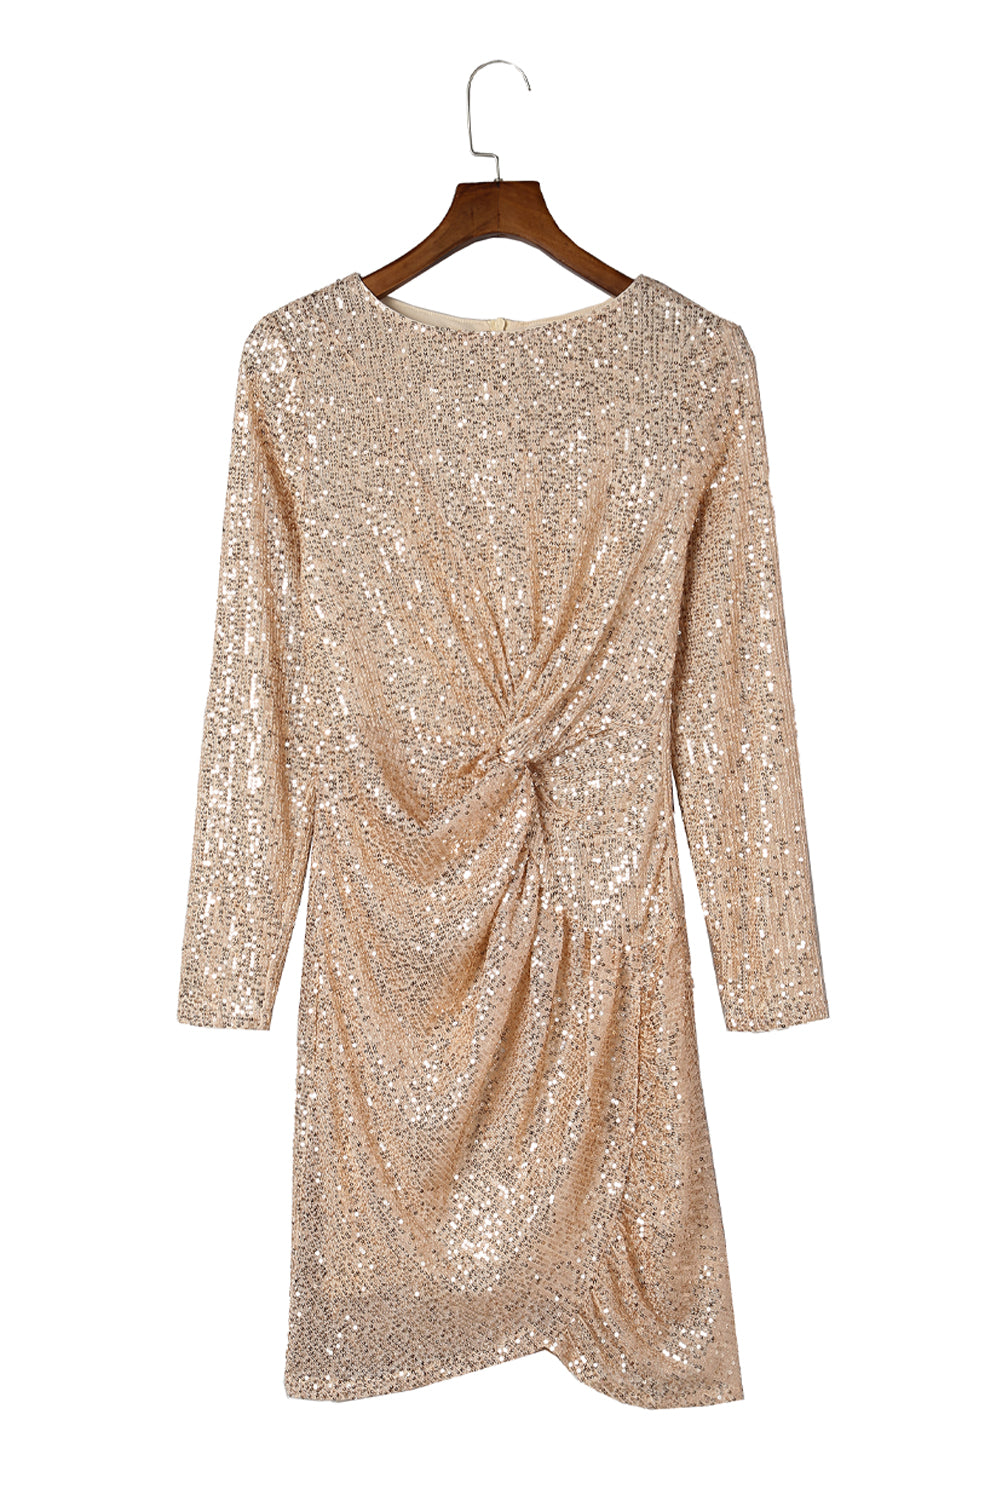 Apricot Knot Pack Hip Sequin Dress